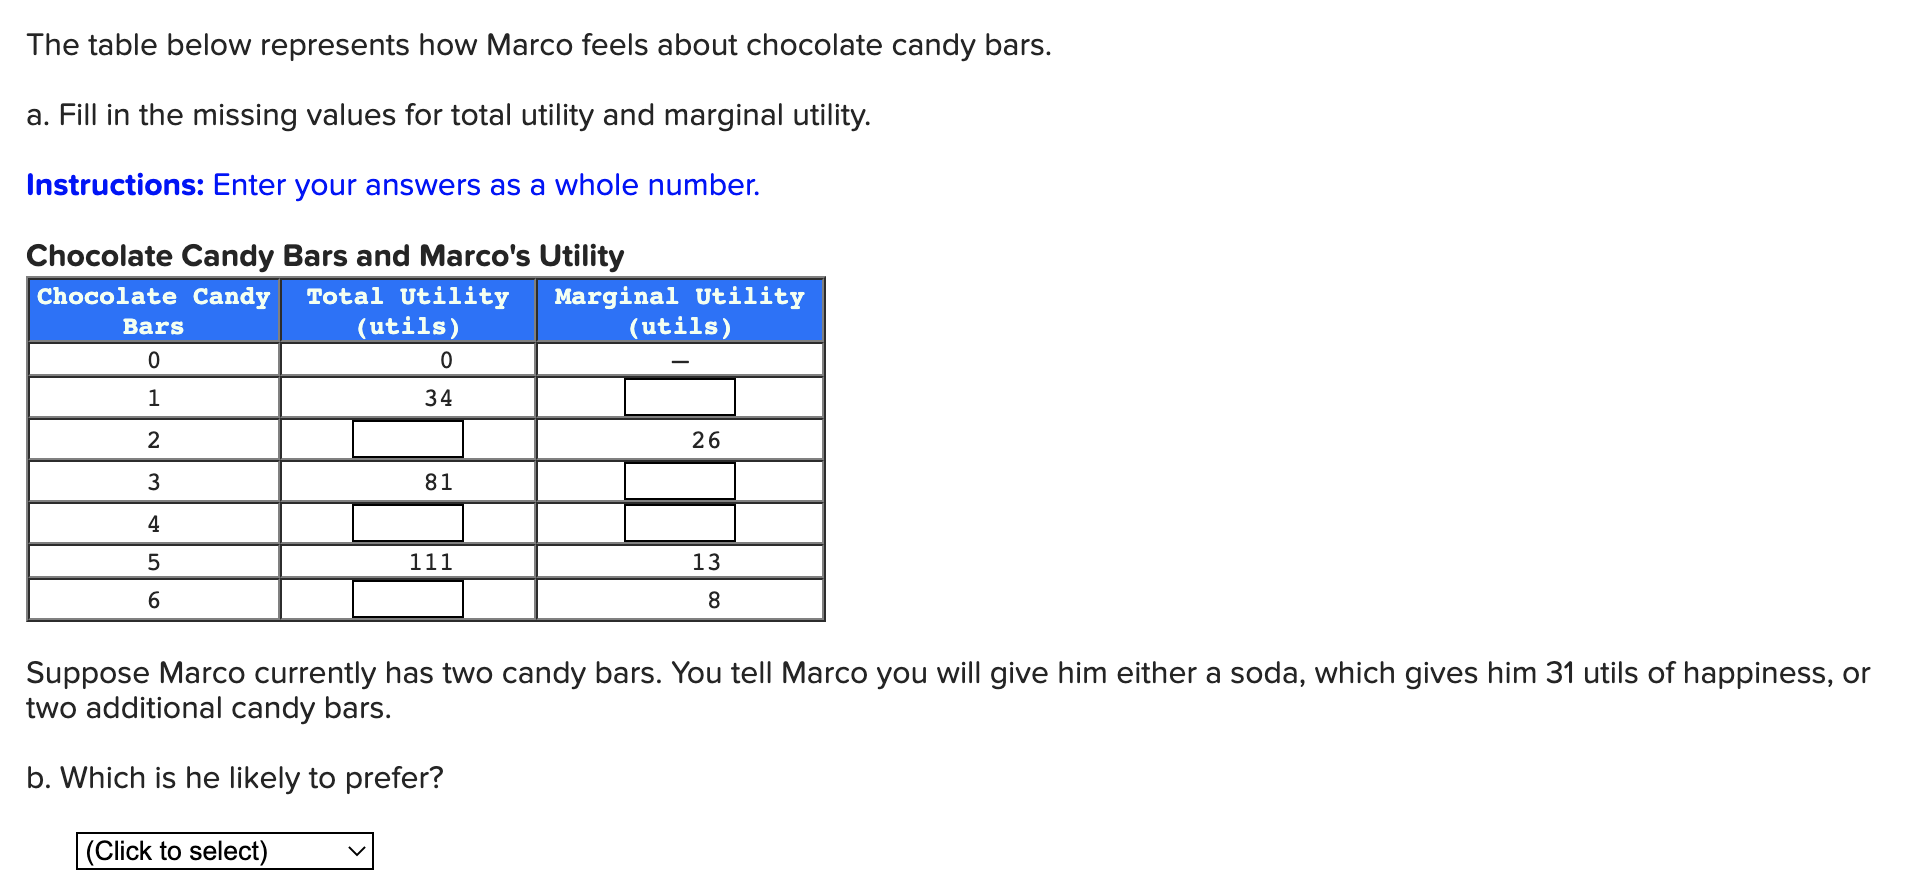 The table below represents how Marco feels about chocolate candy bars.
a. Fill in the missing values for total utility and ma